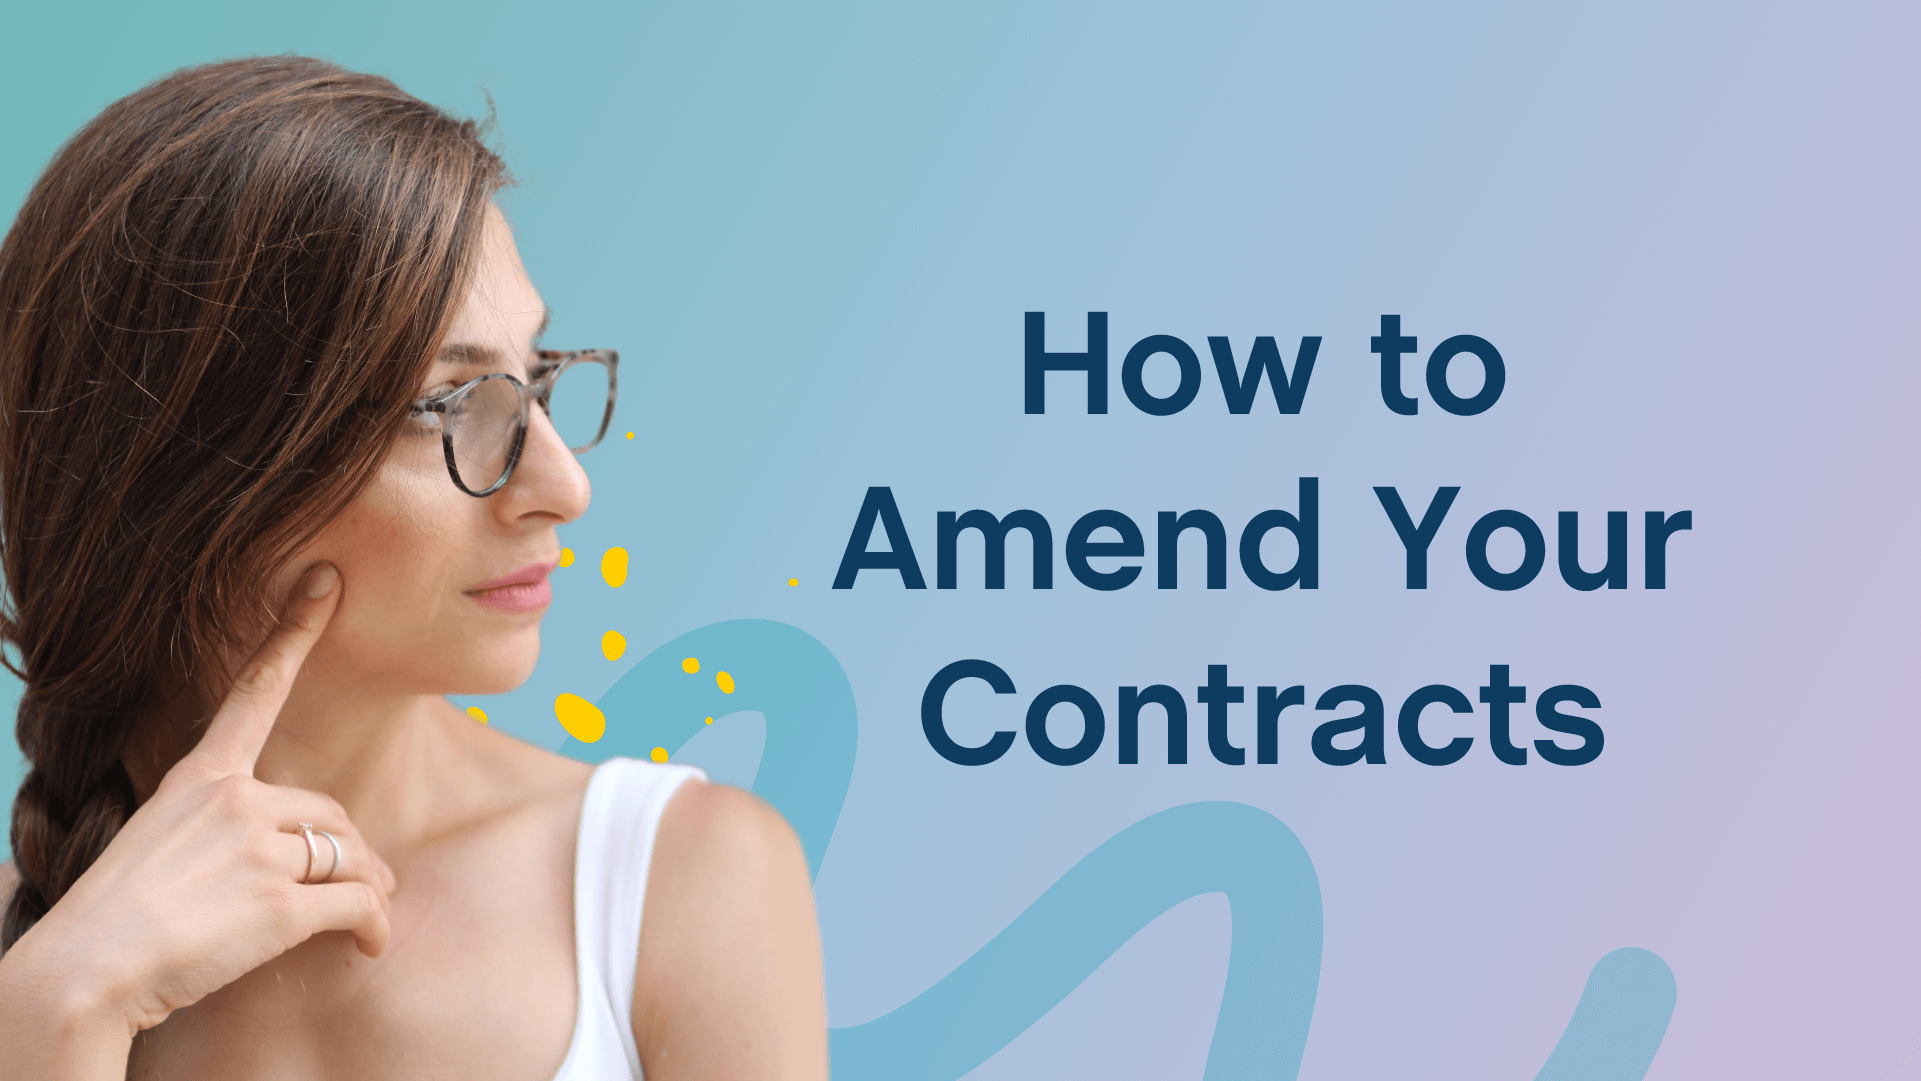 How to Amend Your Contracts Without Rewriting Them